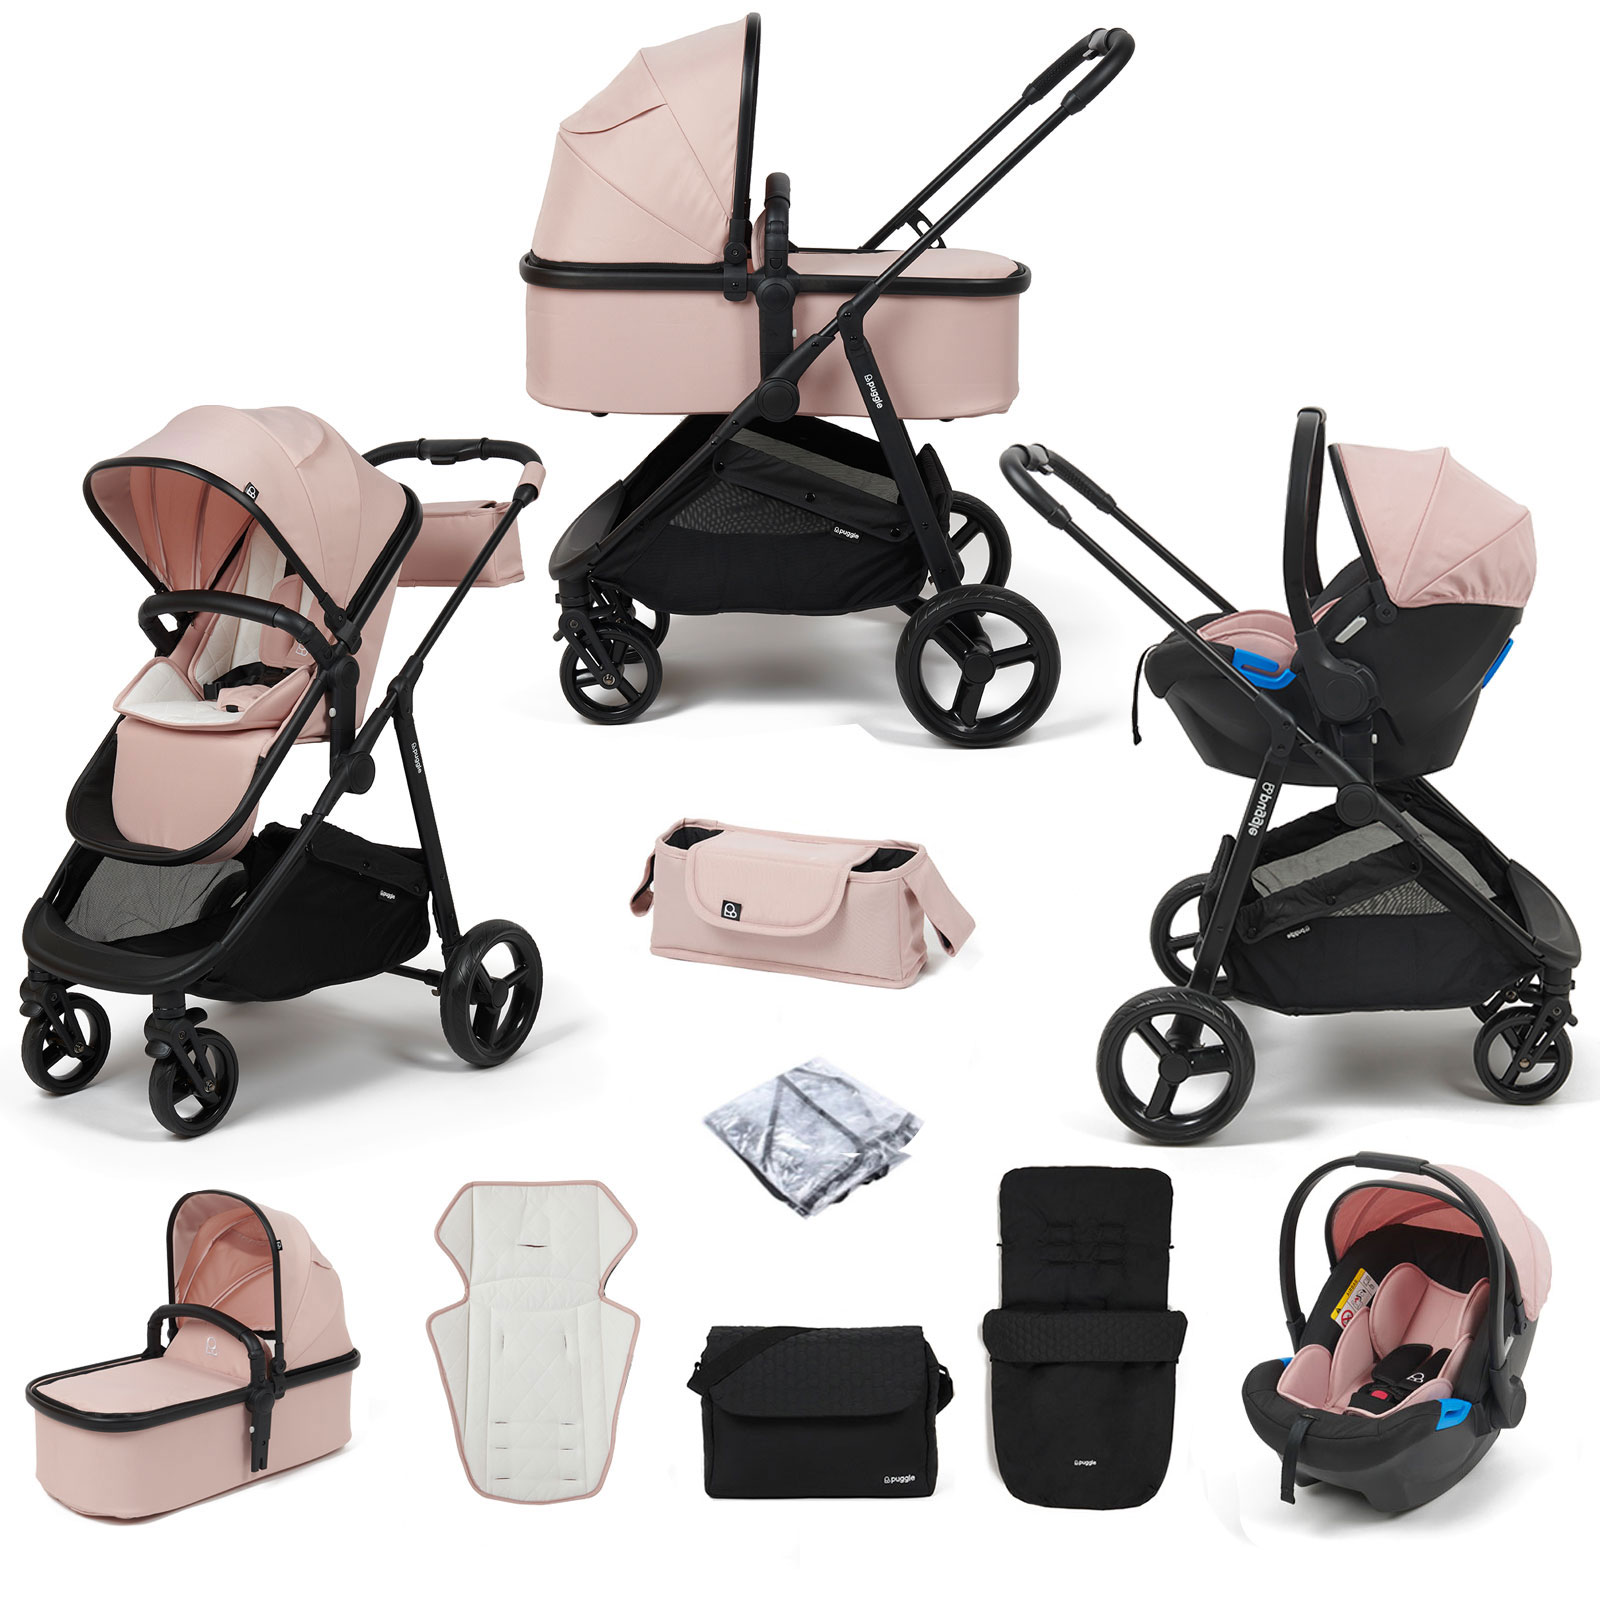 Puggle Monaco XT 3in1 Travel System with Organiser, Footmuff & Changing Bag - Blush Pink